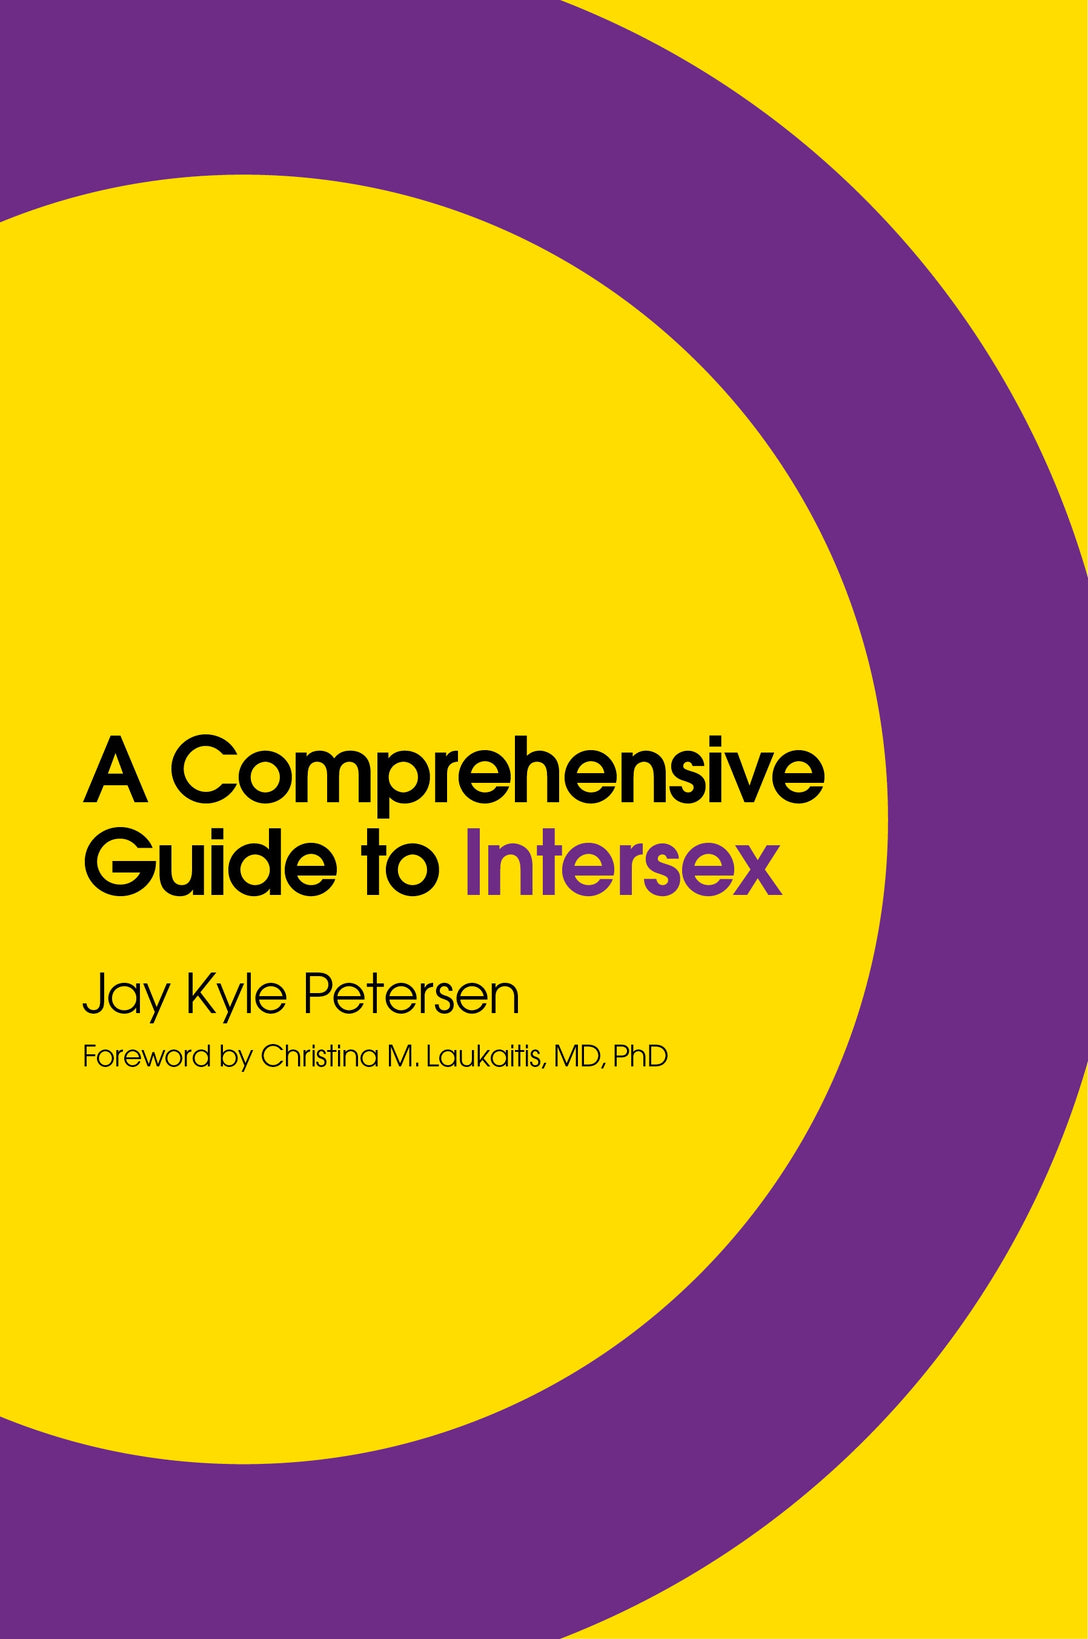 A Comprehensive Guide to Intersex by Jay Kyle Petersen, Christina M. Laukaitis